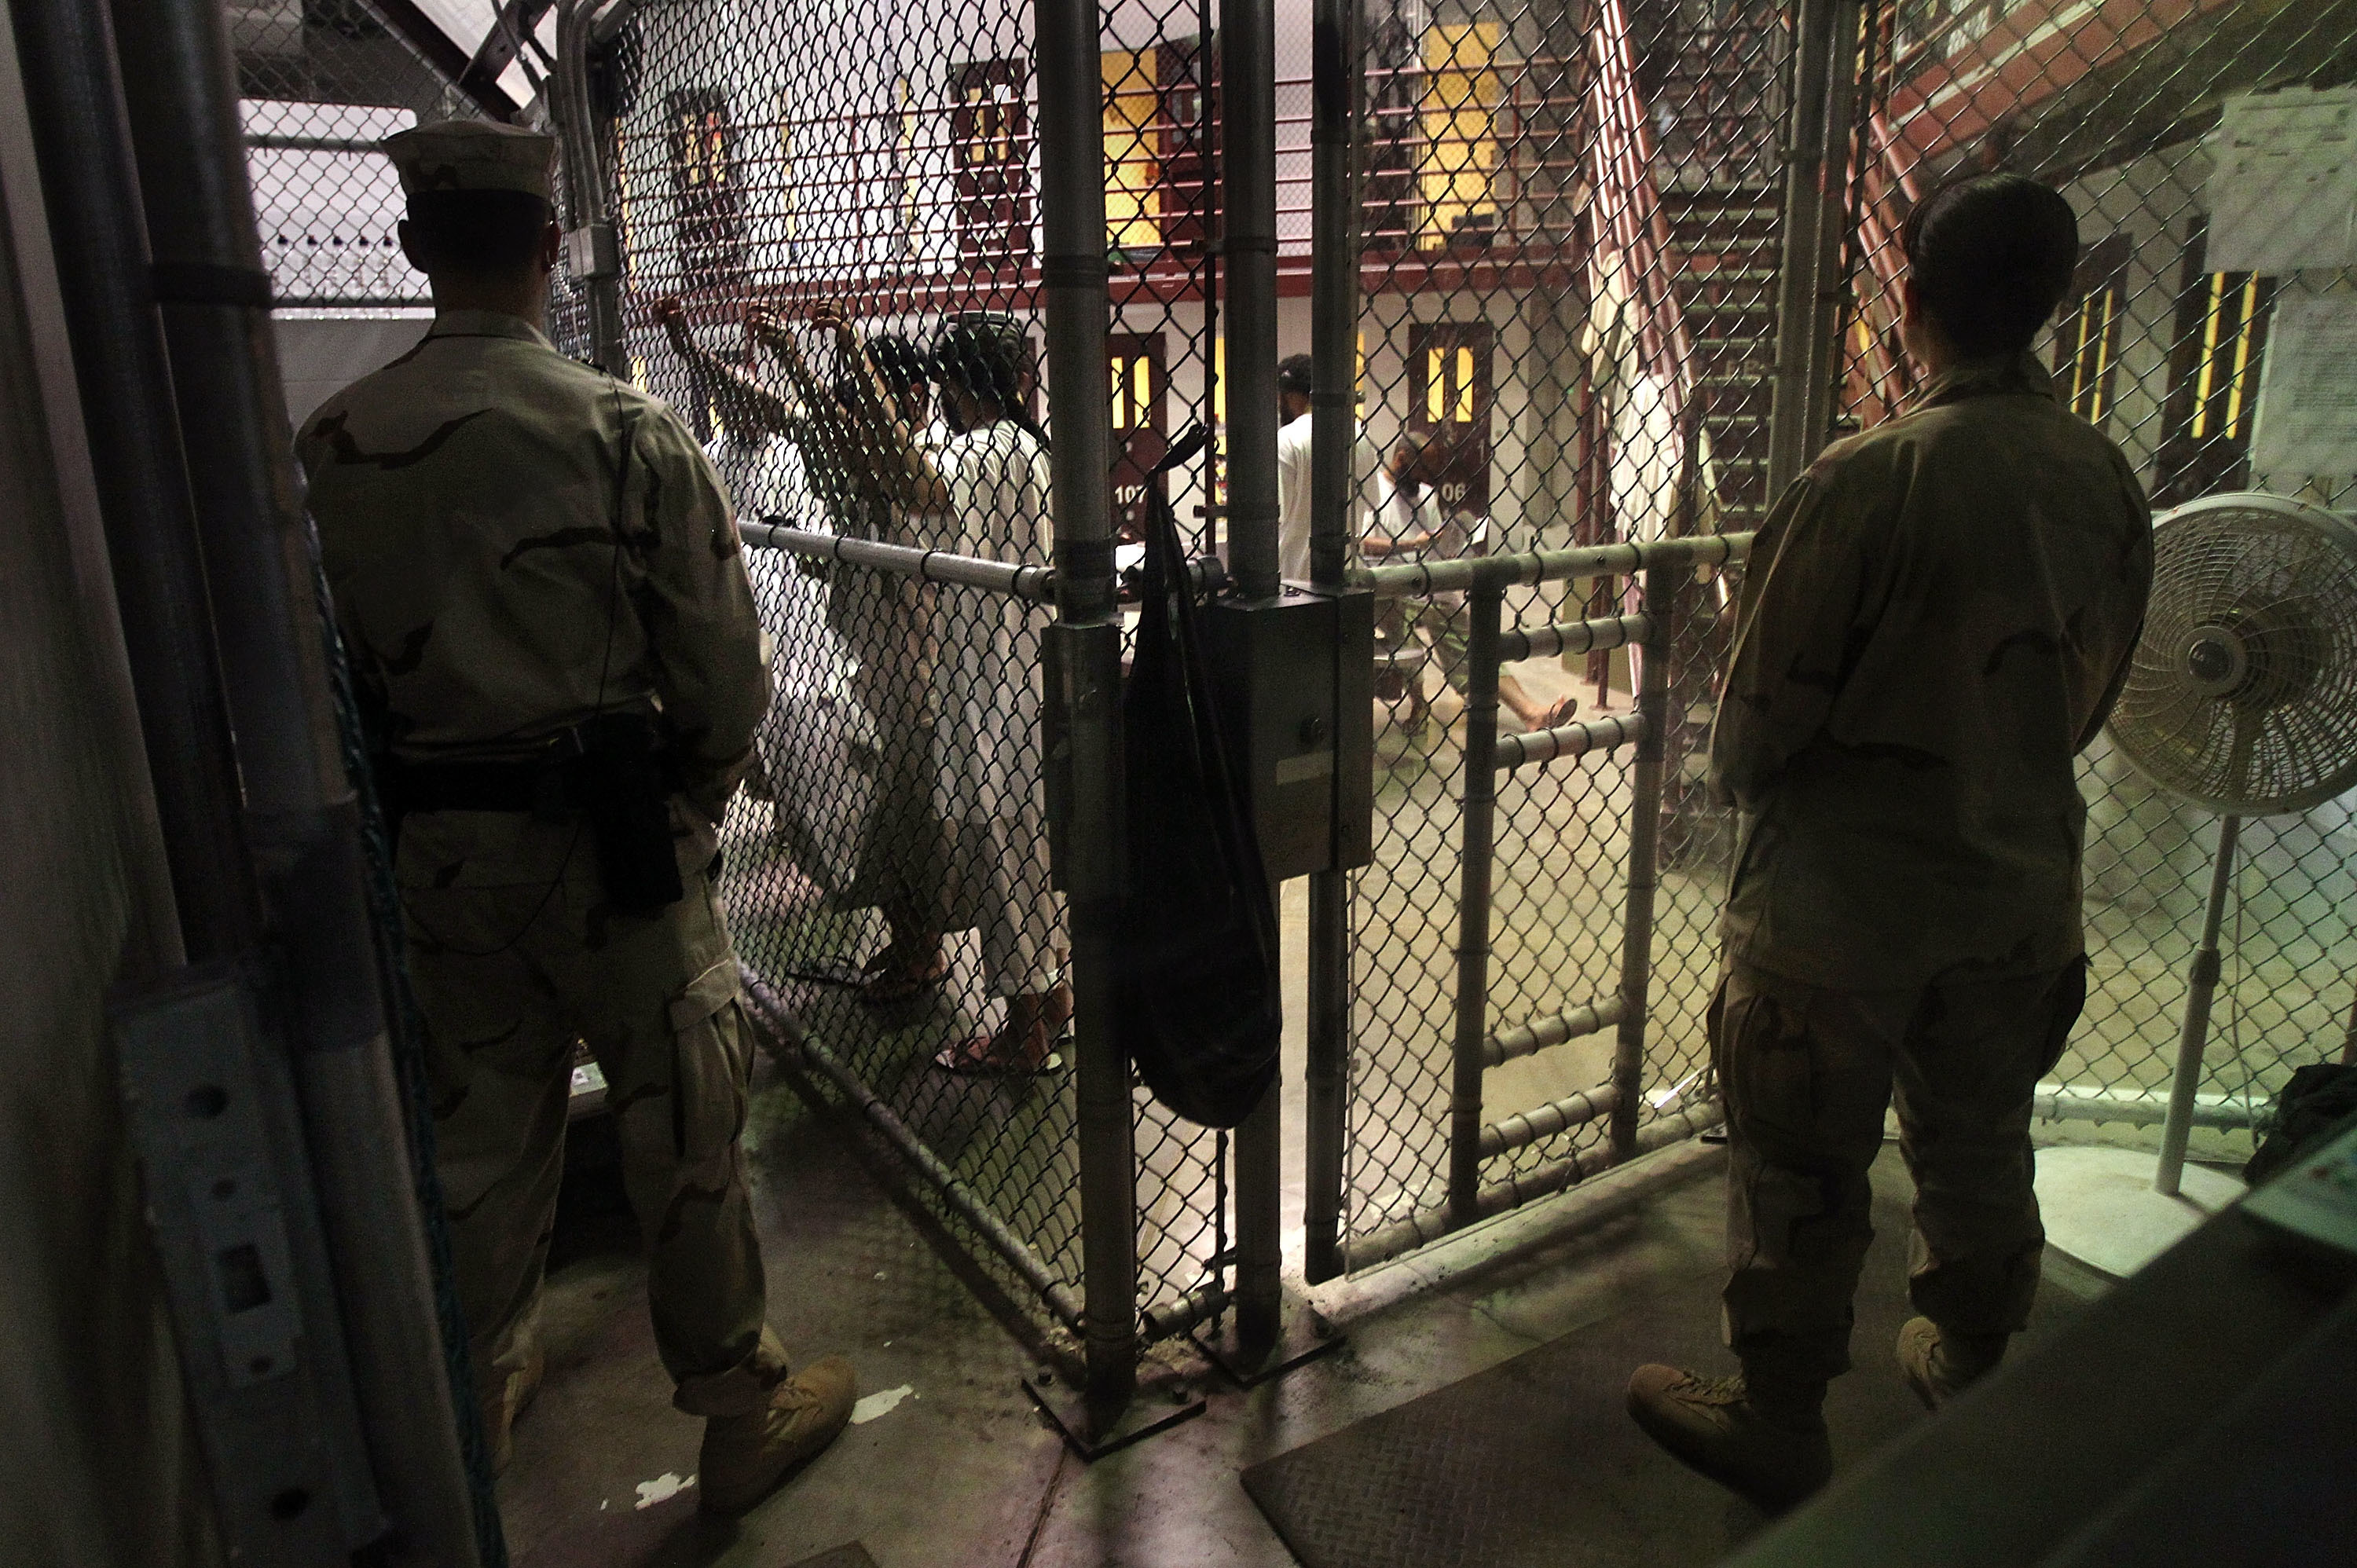 U.S. military guards watch detainees at Camp 6 in the Guantanamo Bay detention center. 